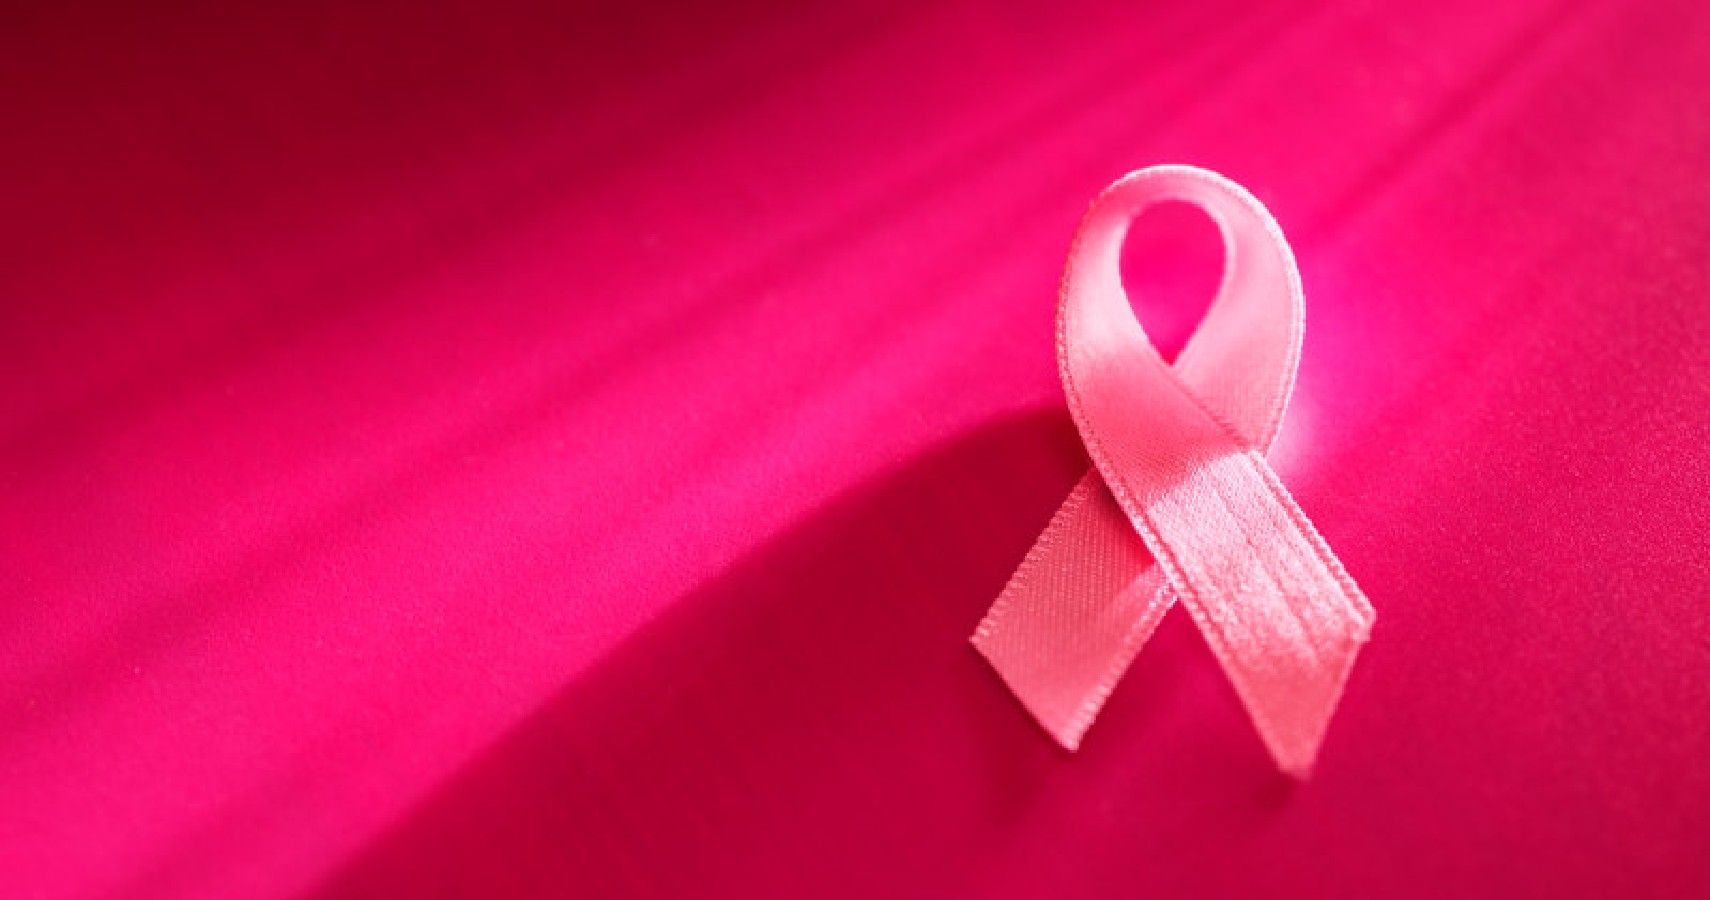 Pregnancy Doesn't Reduce Efficacy Of Chemotherapy On Breast Cancer